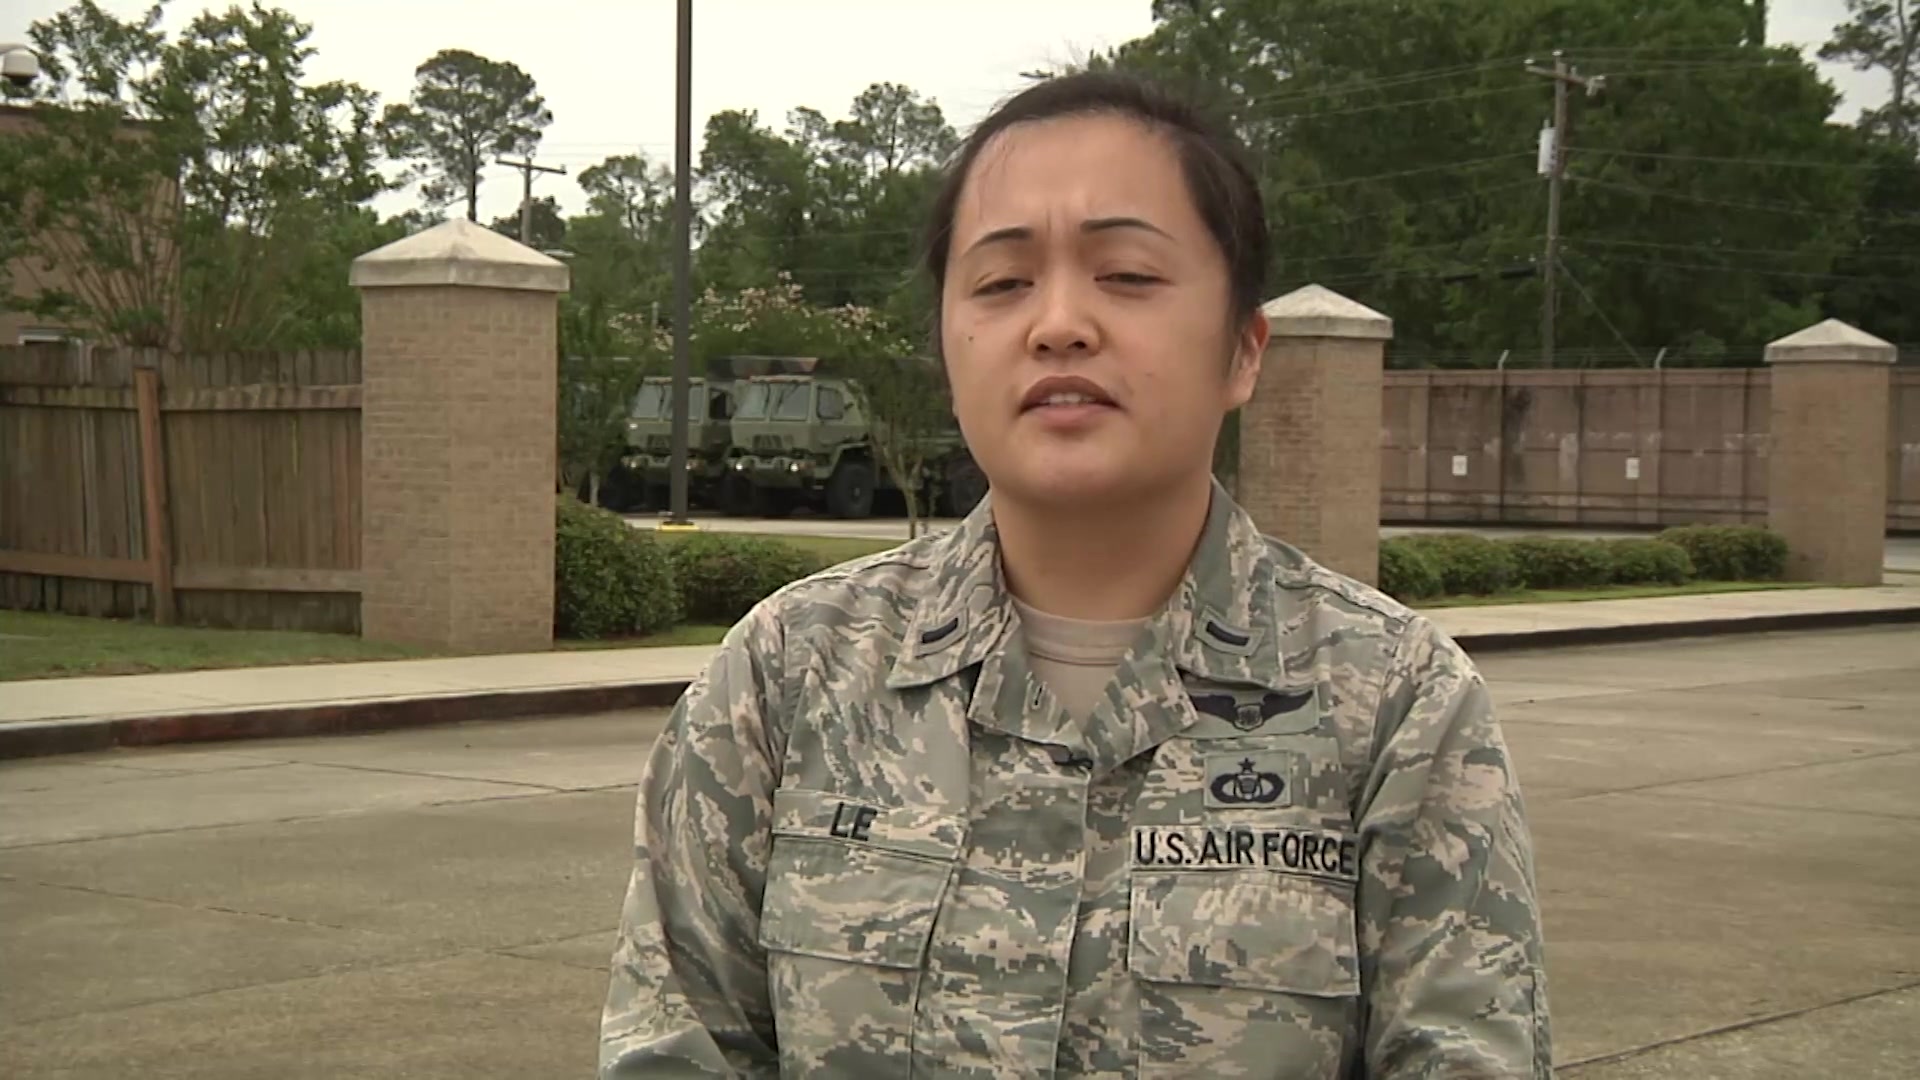 In recognition of Asian American & Pacific Islander Heritage Month, 1st Lt. Linda Le talks about how she's grown professionally and personally during her 15 years in the military. Le served in the active duty Air Force before joining the Mississippi National Guard, and is currently an Air Battle Manager with the 255th Air Control Squadron in Gulfport. (U.S. National Guard video by A. Danielle Thomas)

Music courtesy: "Tears of Joy" Royalty free music from Fesliyan Studios